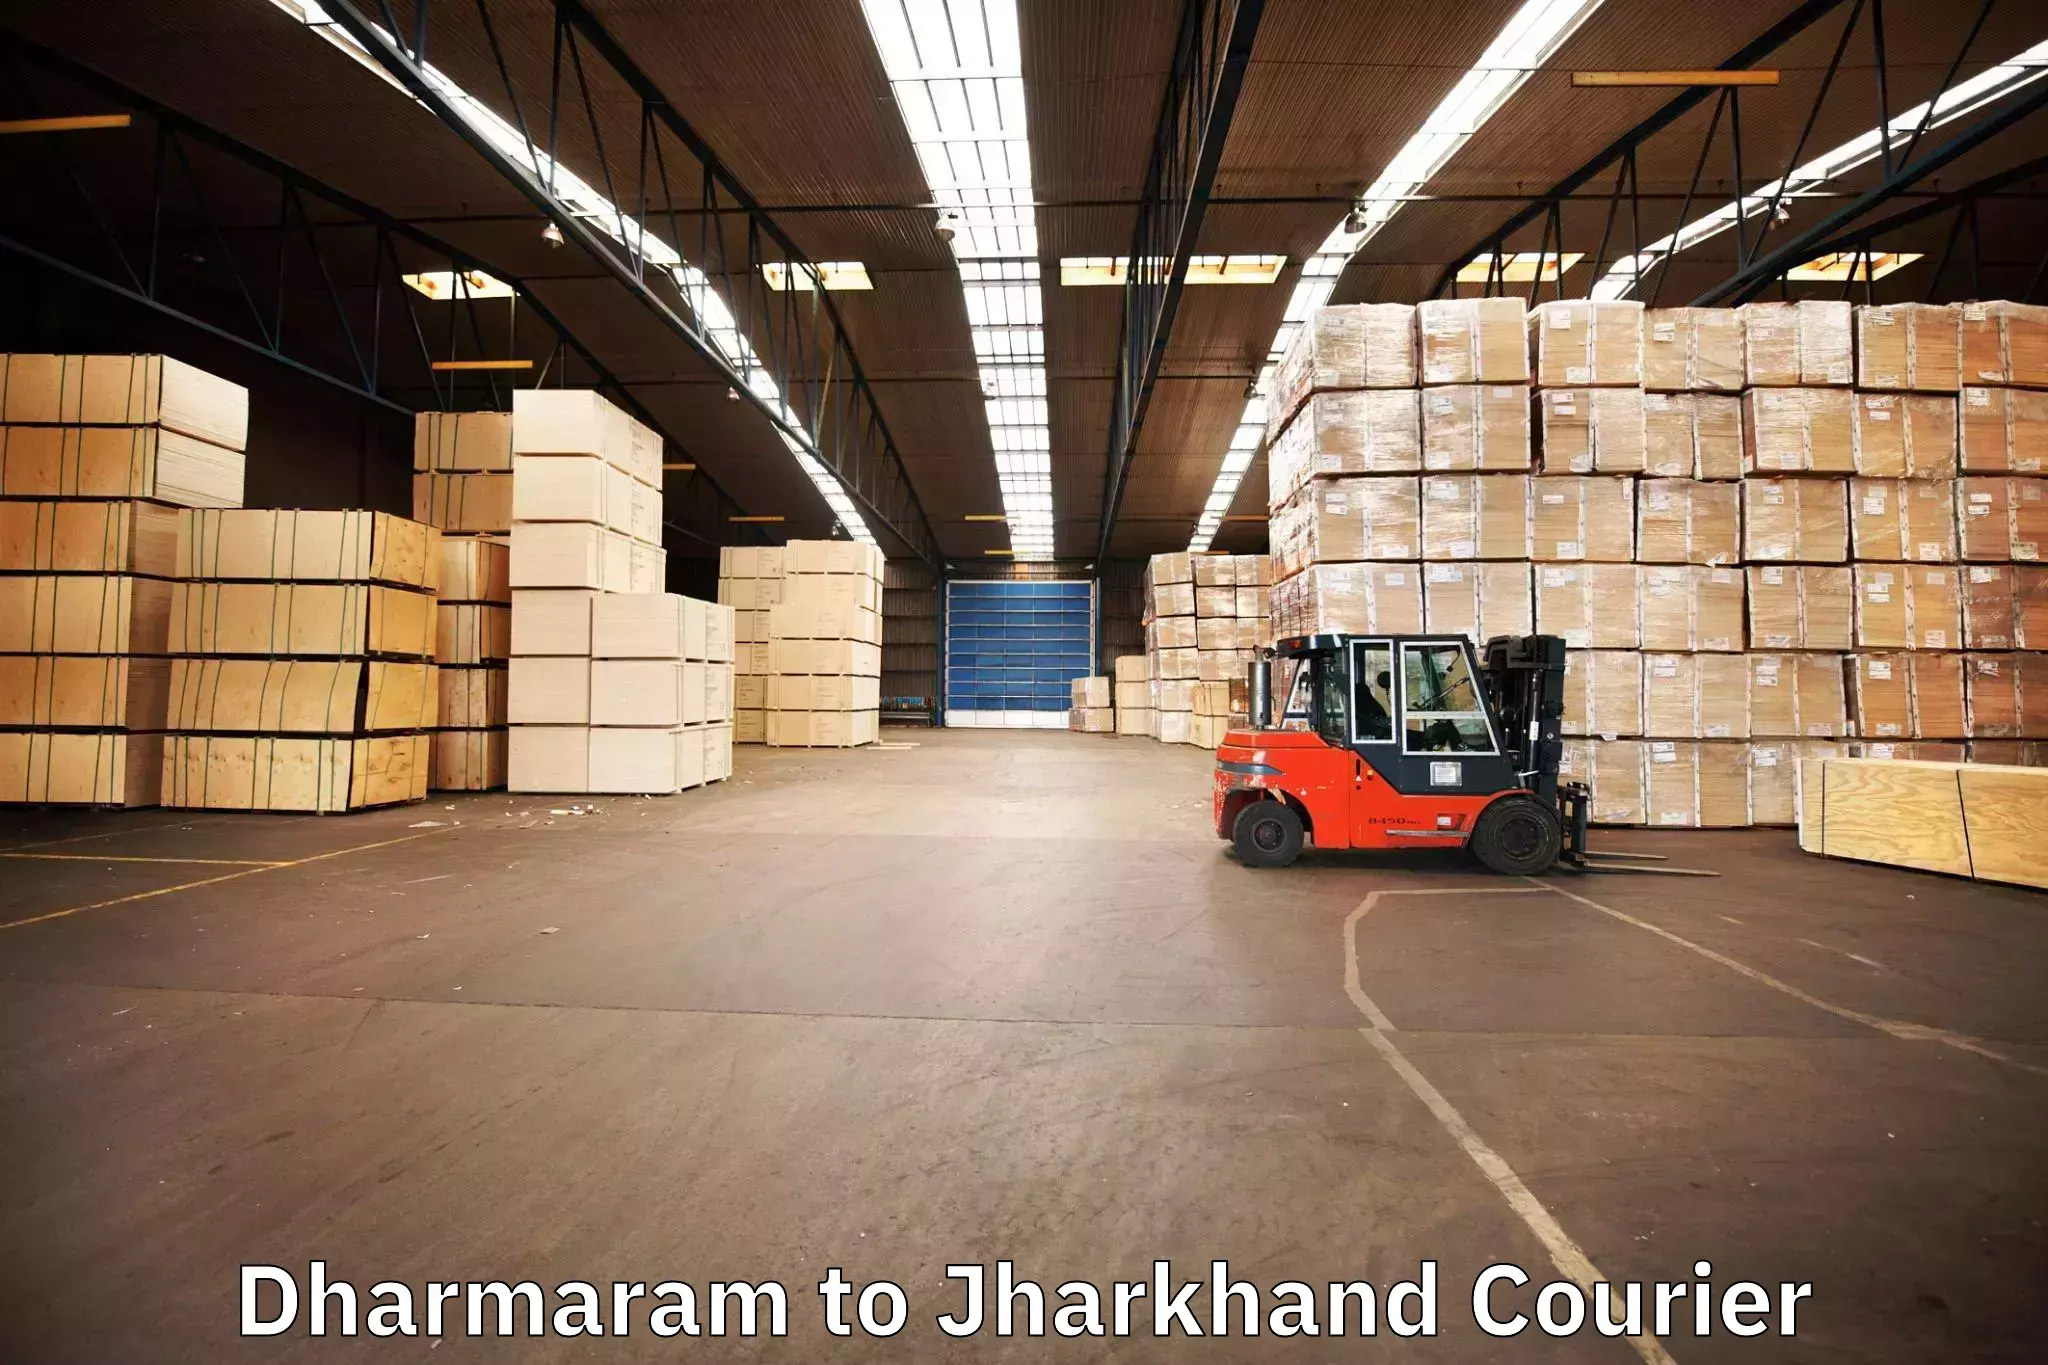 Quality relocation services in Dharmaram to Dhalbhumgarh